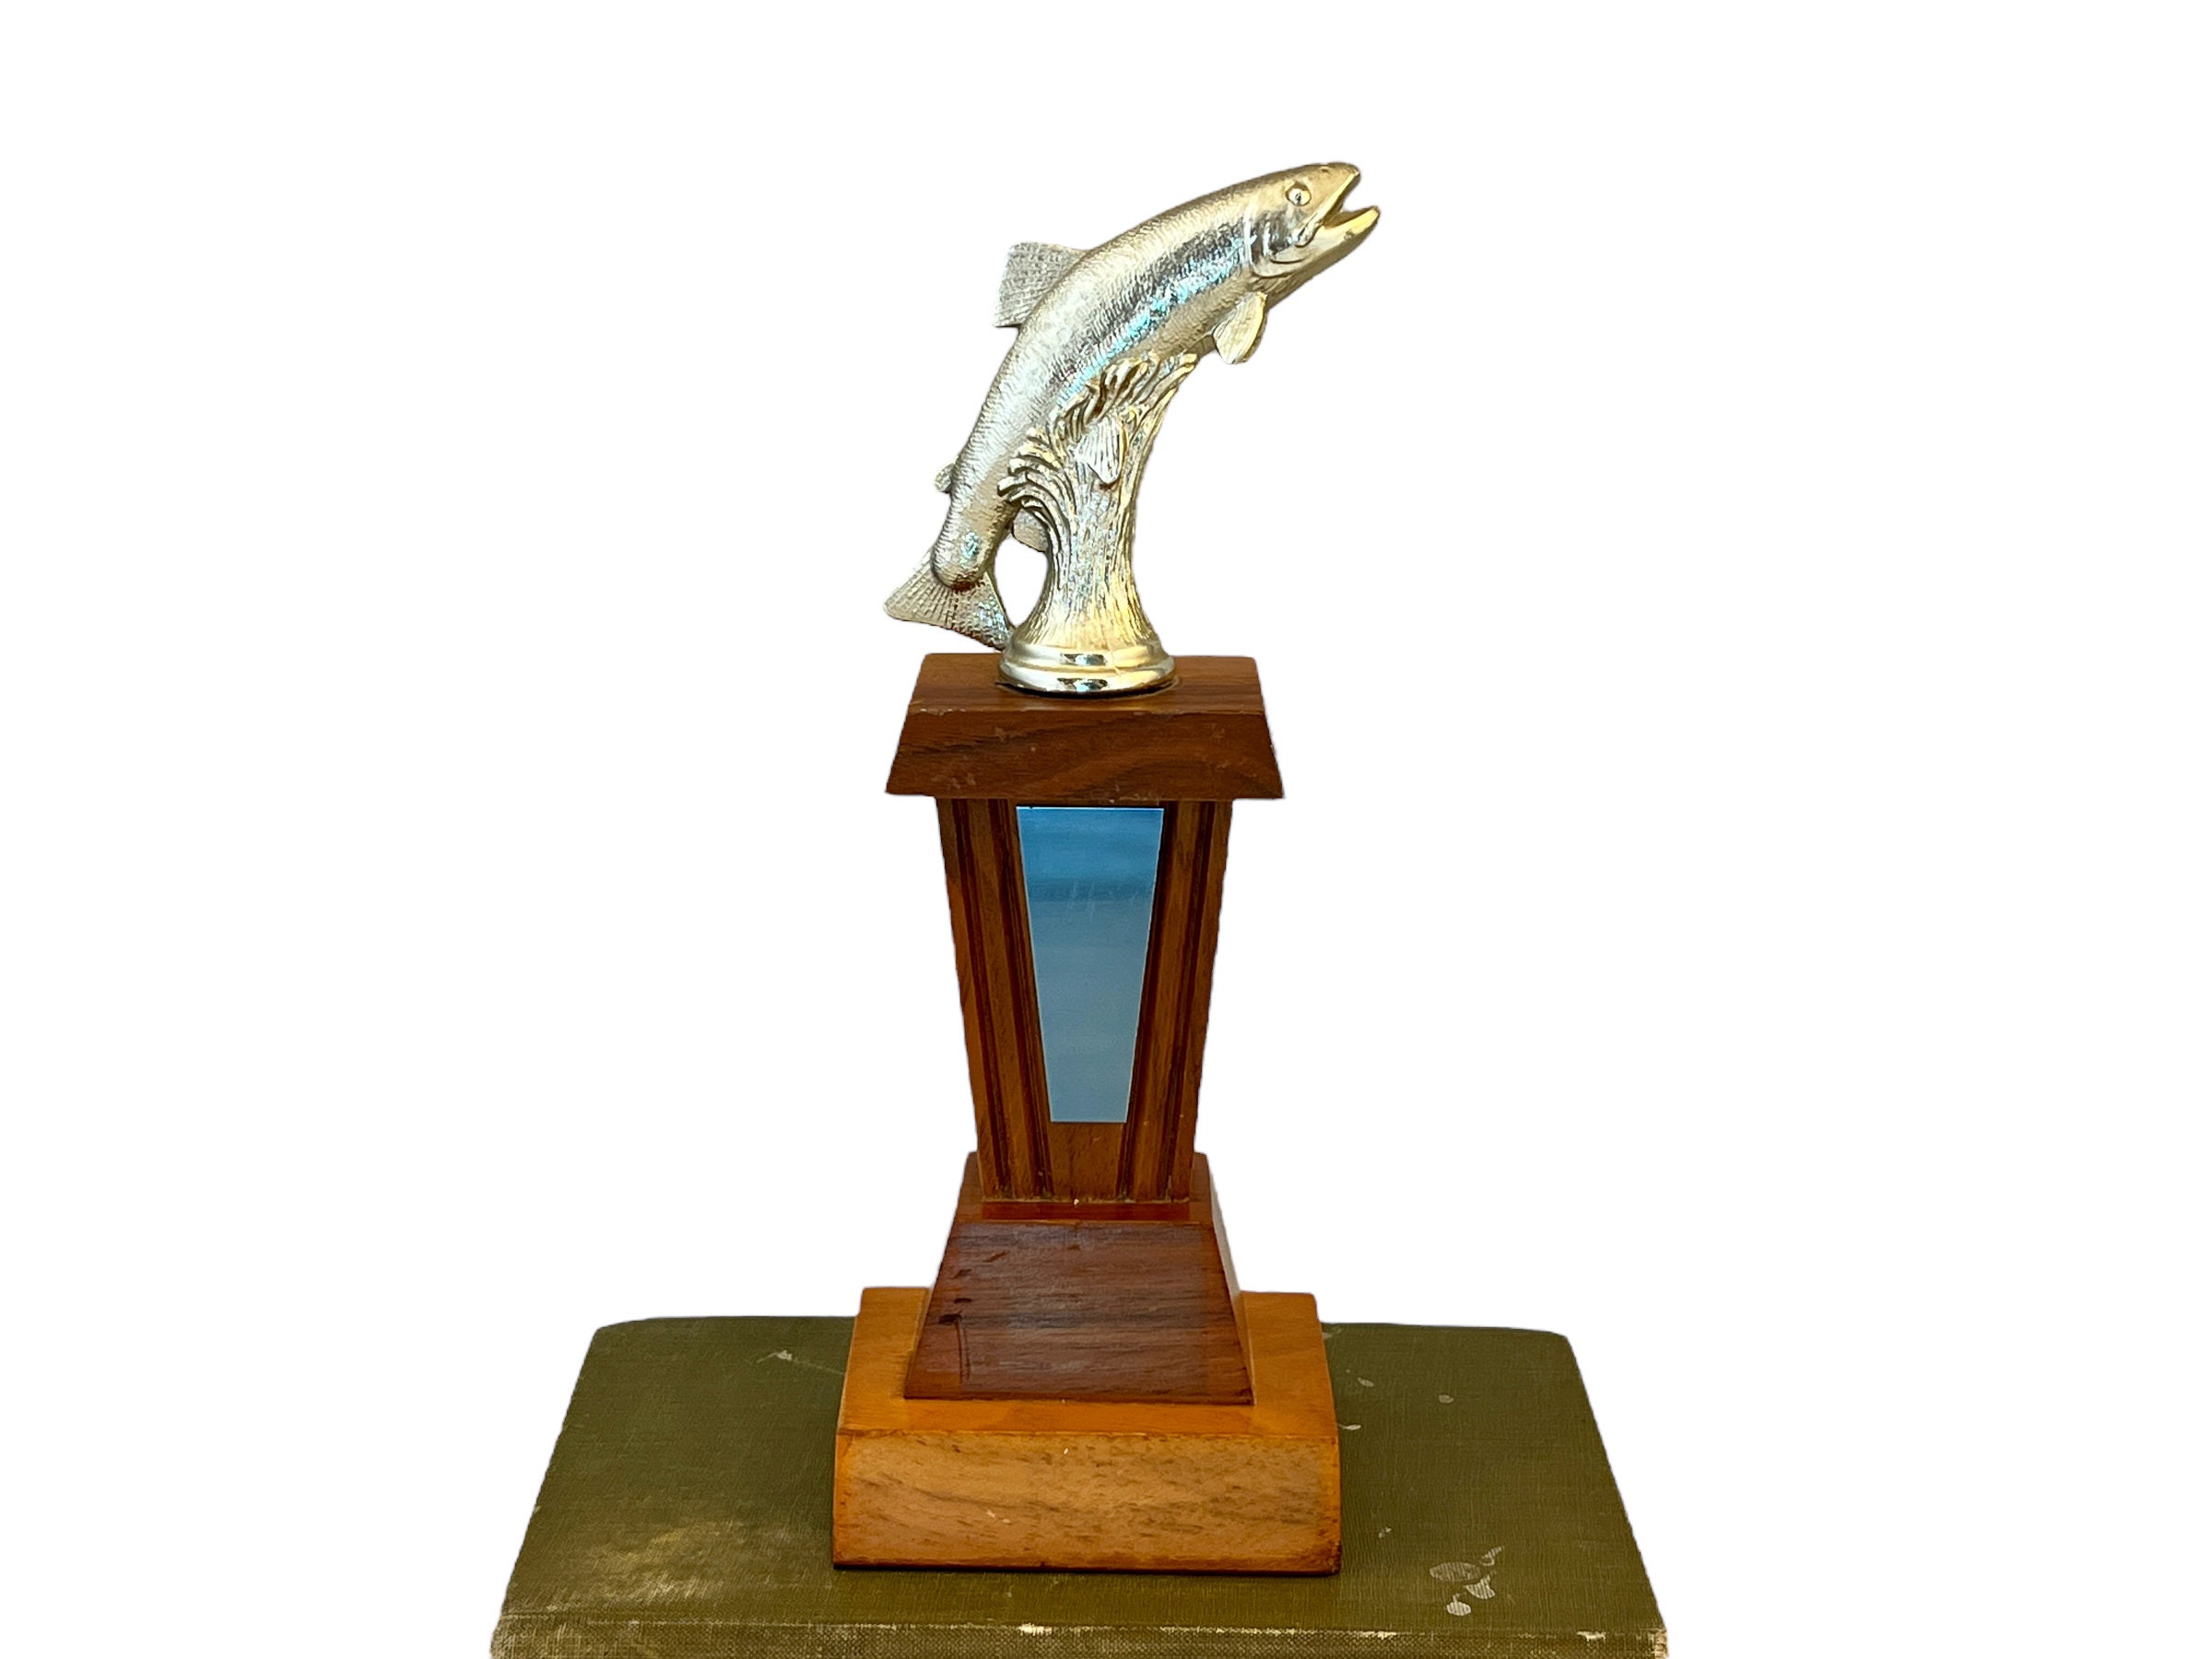 Vintage Fishing Trophy, Mid Century Angling Award, Gold Tone Metal Trout  Fish Figure, Wood Base, Blank 